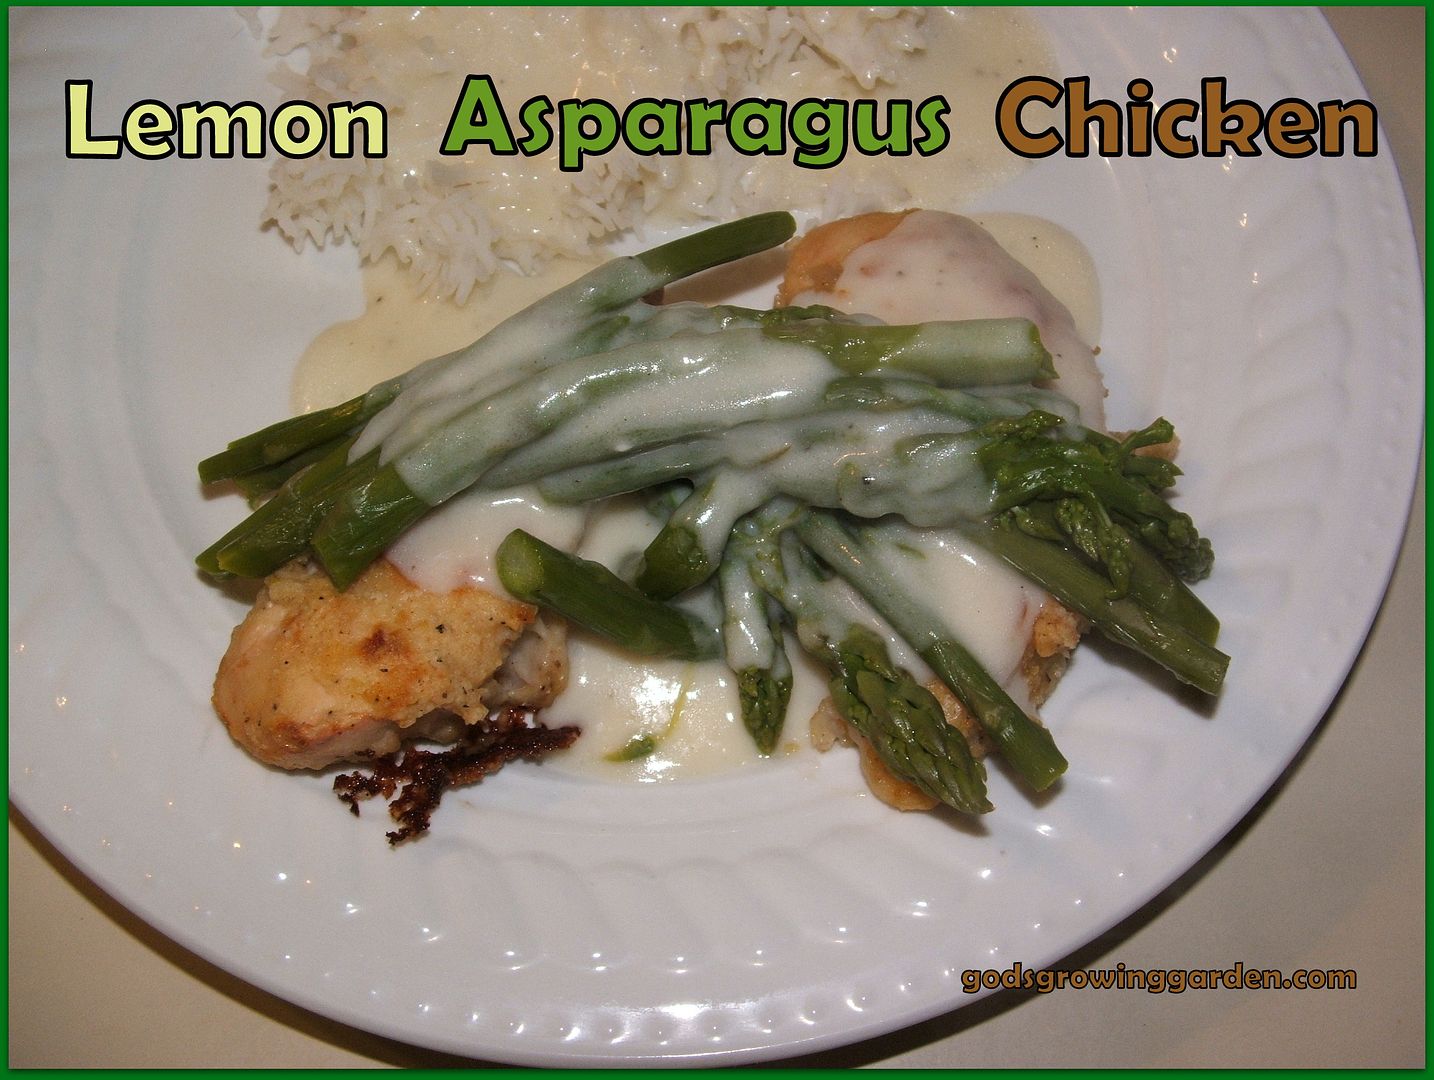 Asparagus Chicken by Angie Ouellette-Tower for godsgrowinggarden.com photo 011_zps86431220.jpg